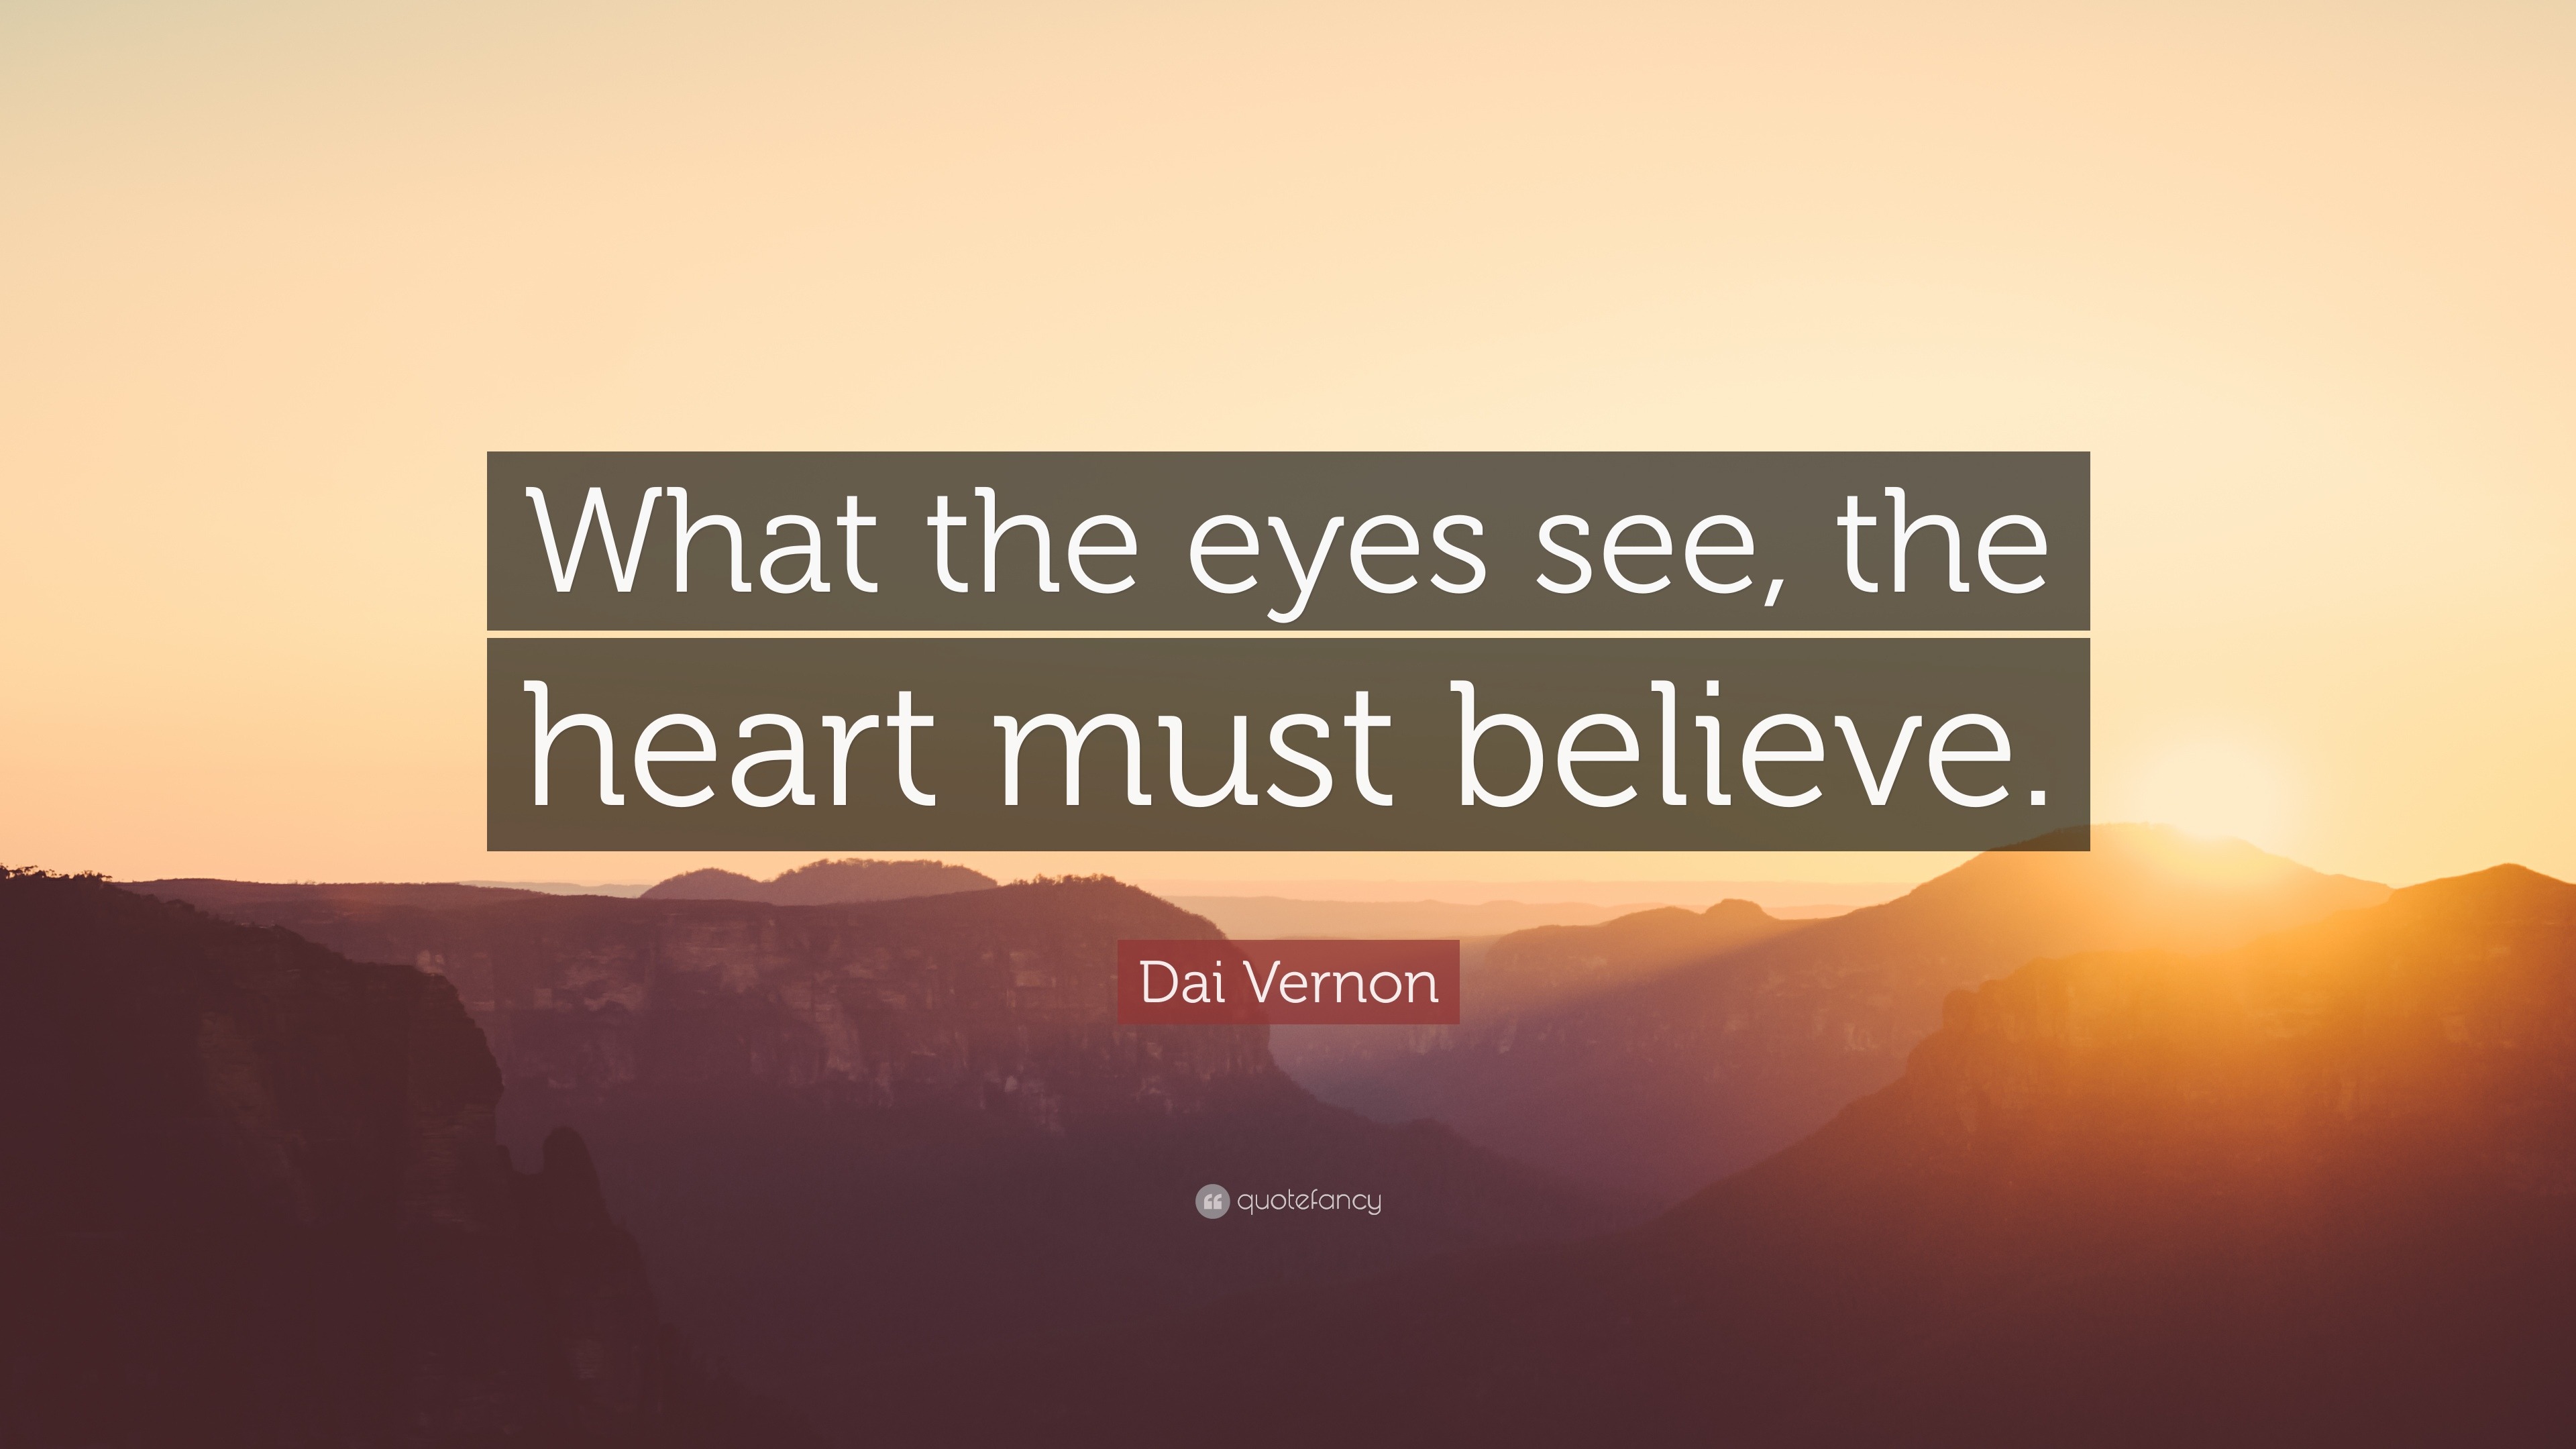 Dai Vernon Quote: “What the eyes see, the heart must believe.”